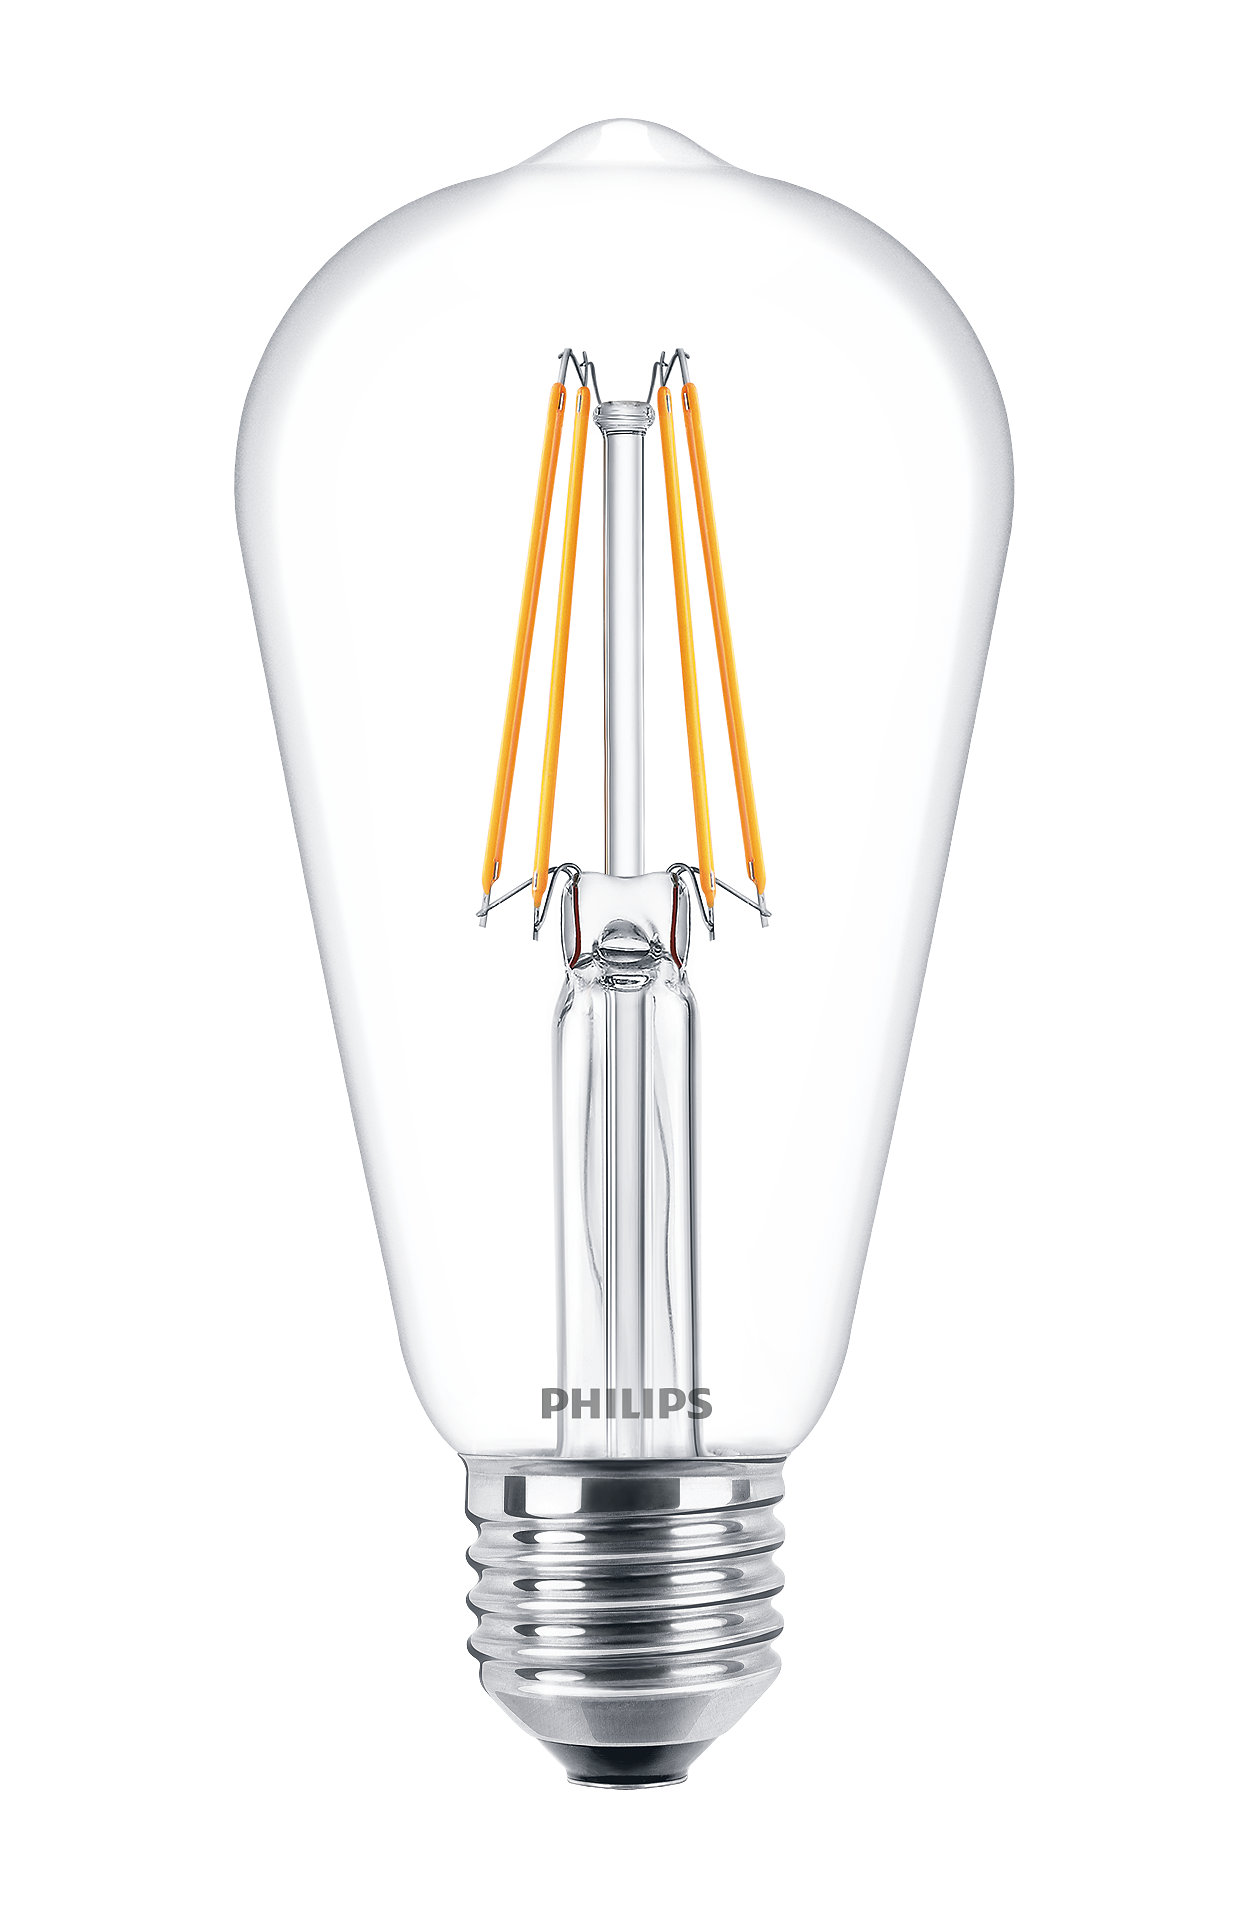 Classic look & feel and LED filament for decorative lighting